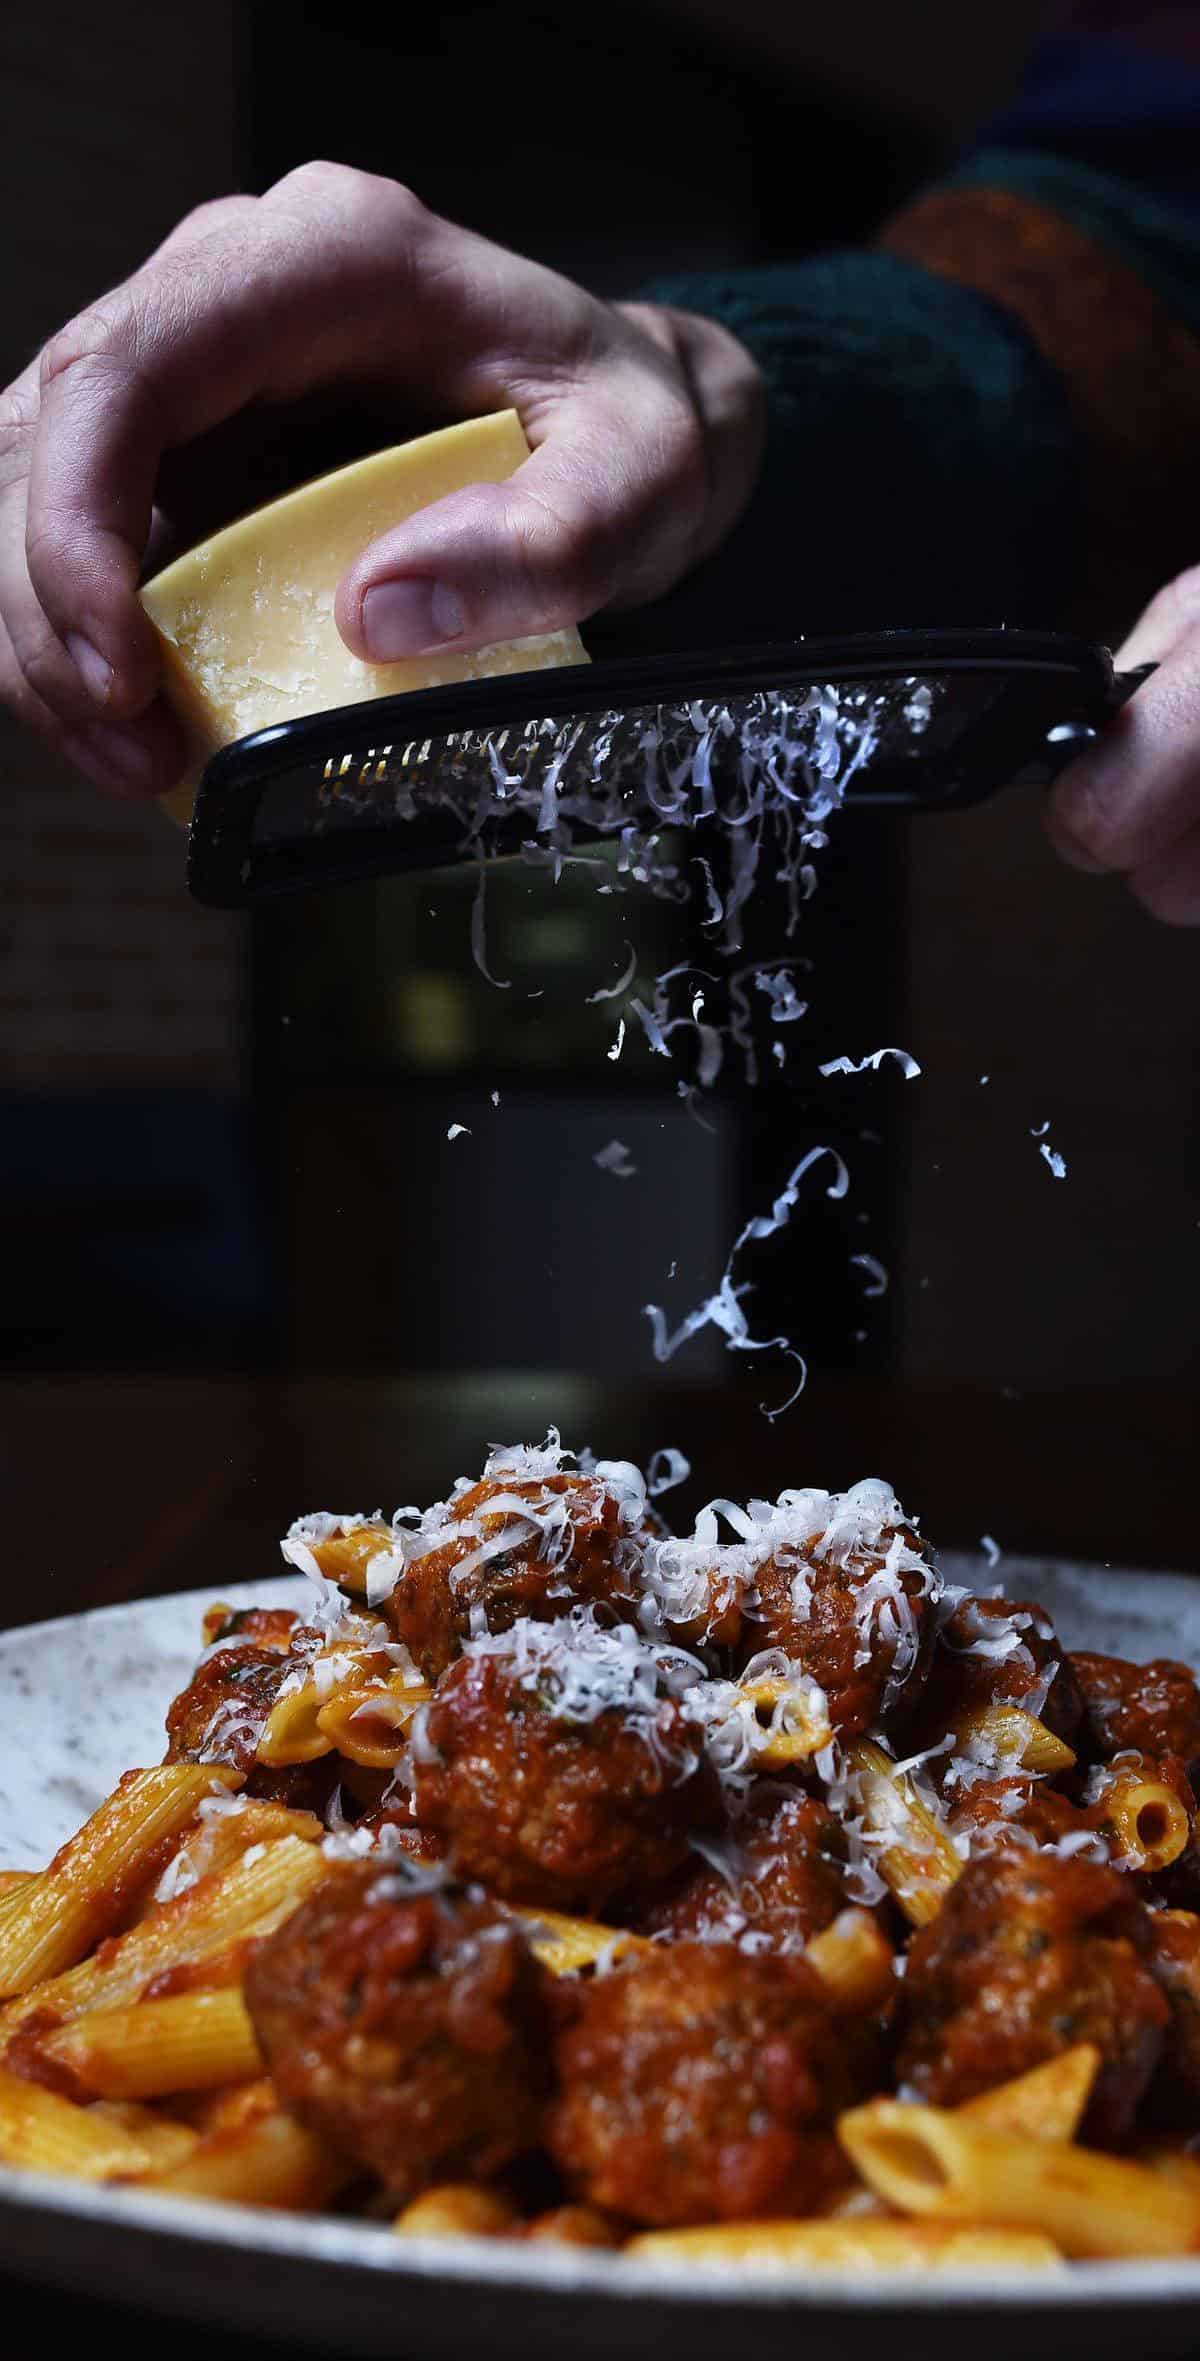  The secret ingredient that makes these meatballs so magical? Love!